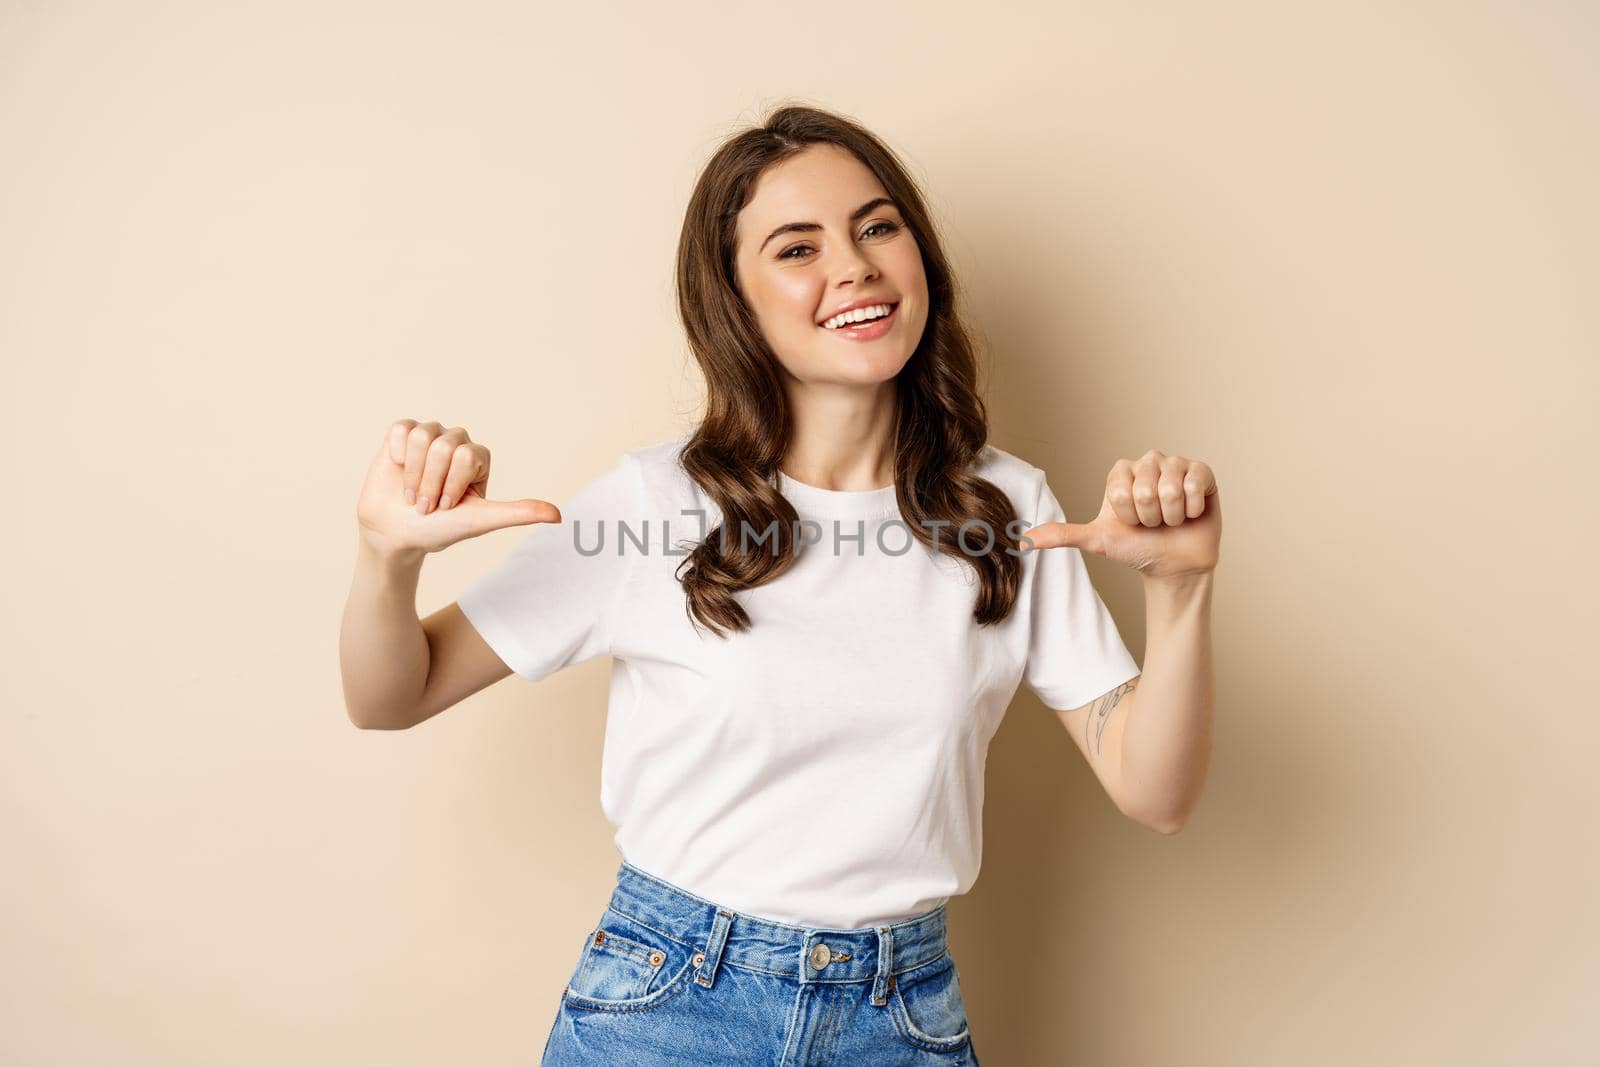 Self-assured young happy woman pointing fingers at herself and dancing, self-promoting, being confident, standing over beige background.